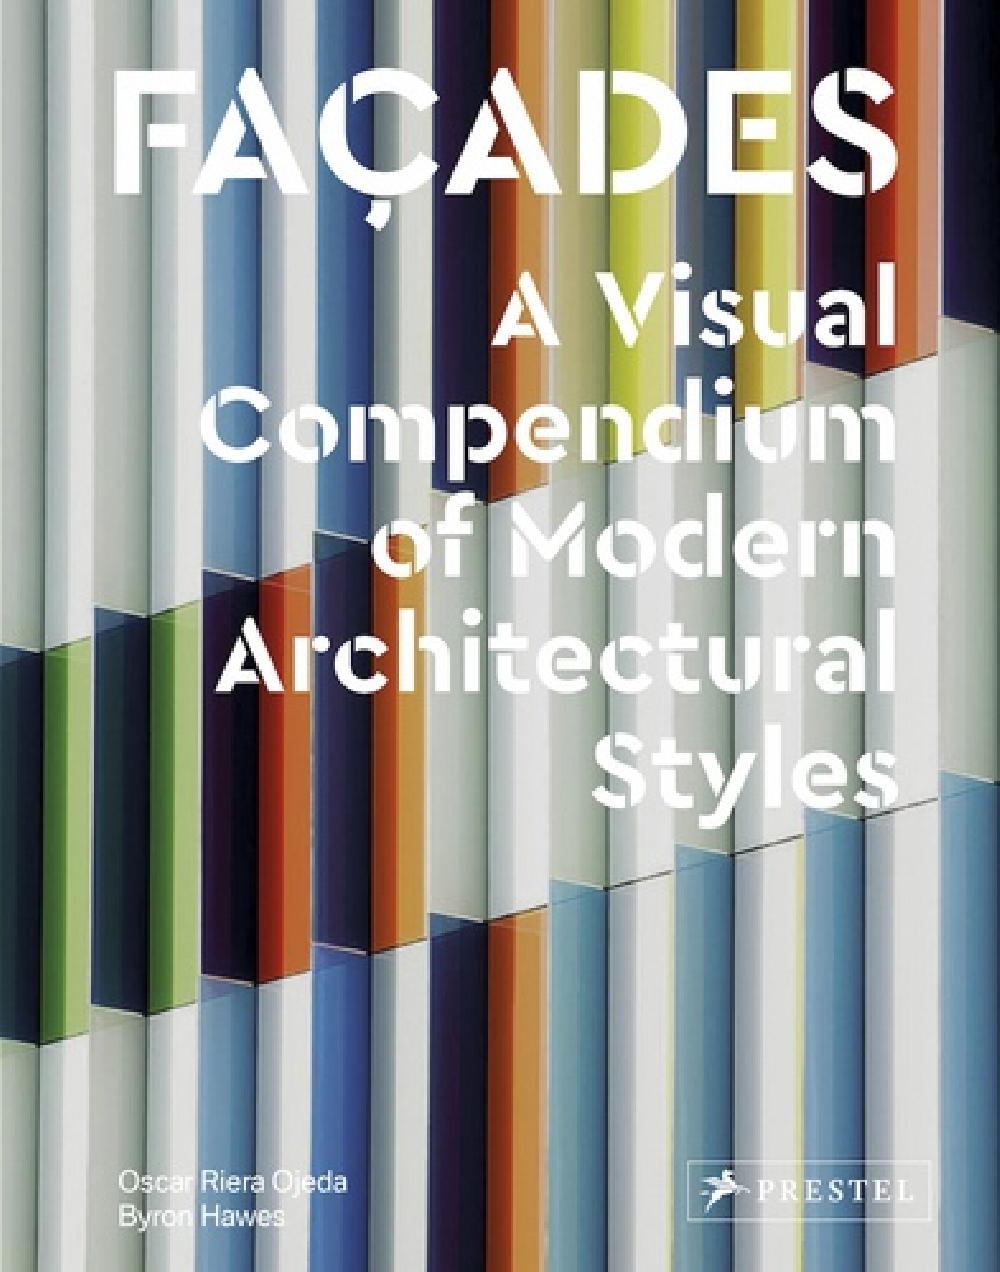 Facades - A visual compendium of modern architectural styles